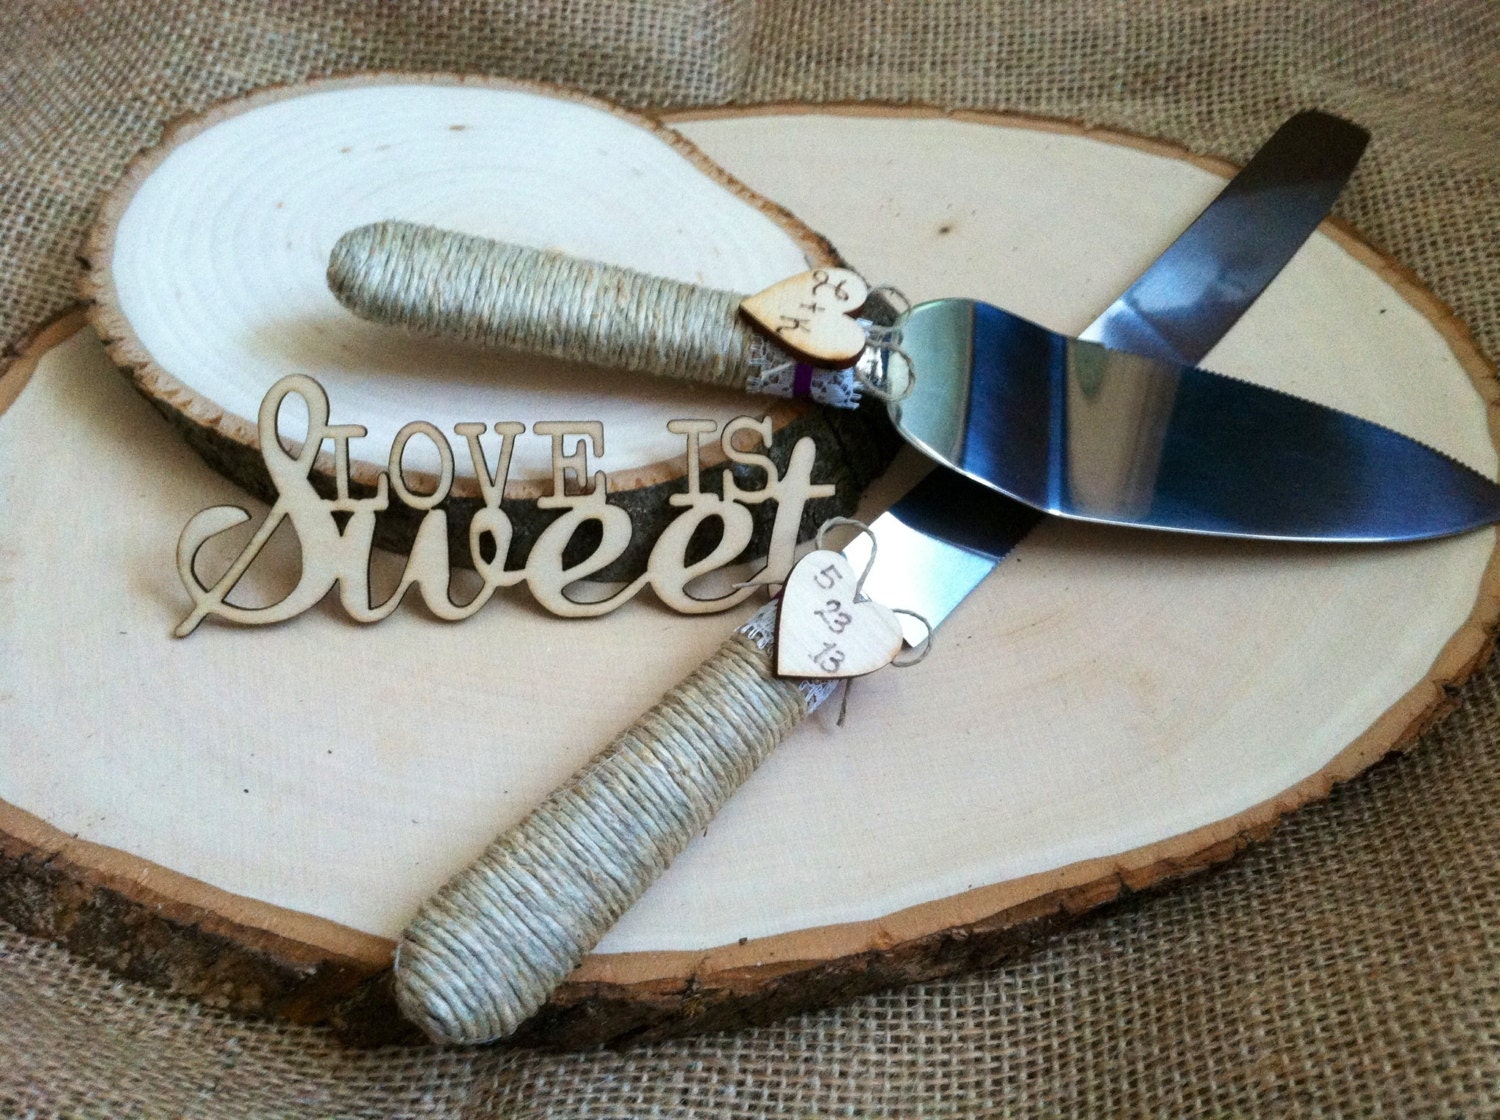 THE ORIGINAL DESIGN - Personalized Rustic Wedding Cake Cutting and Serving Set. Rustic or Country theme Wedding